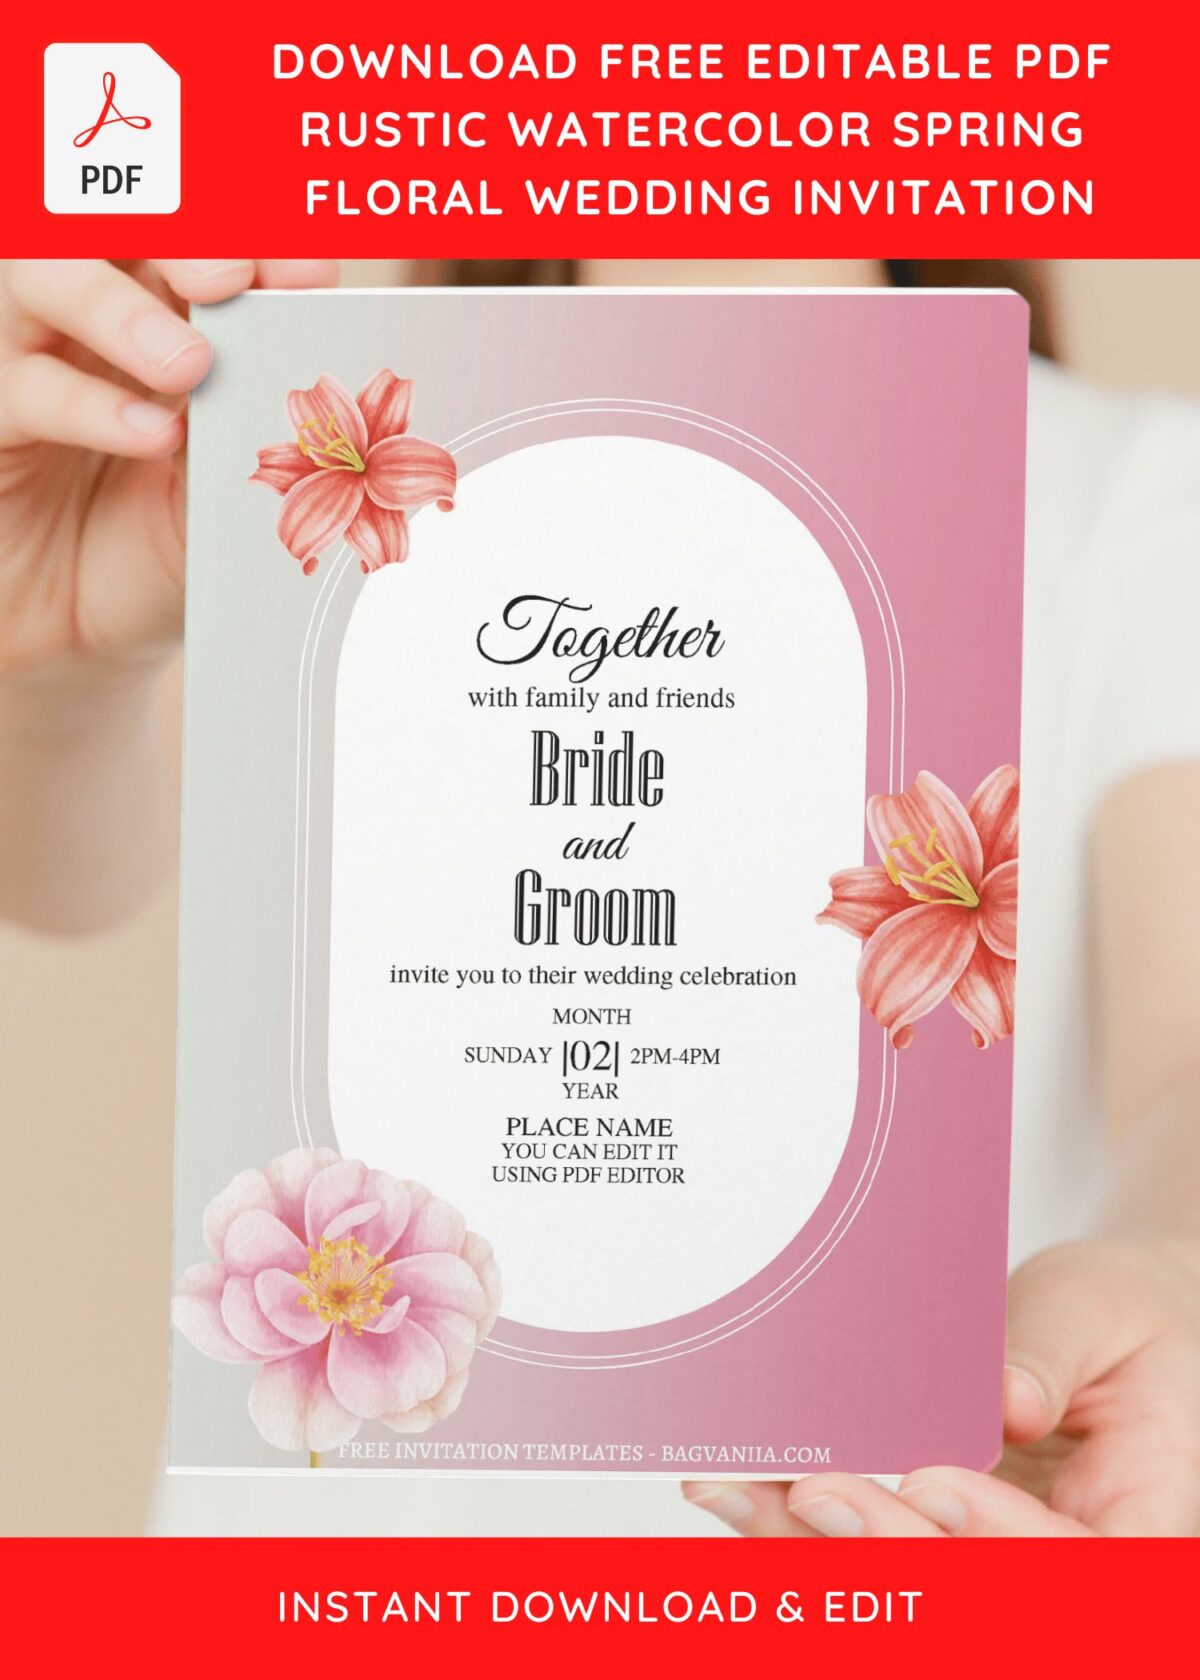 (Free Editable PDF) Minimalist Watercolor Floral Wedding Invitation Templates with beautiful watercolor flower decorations